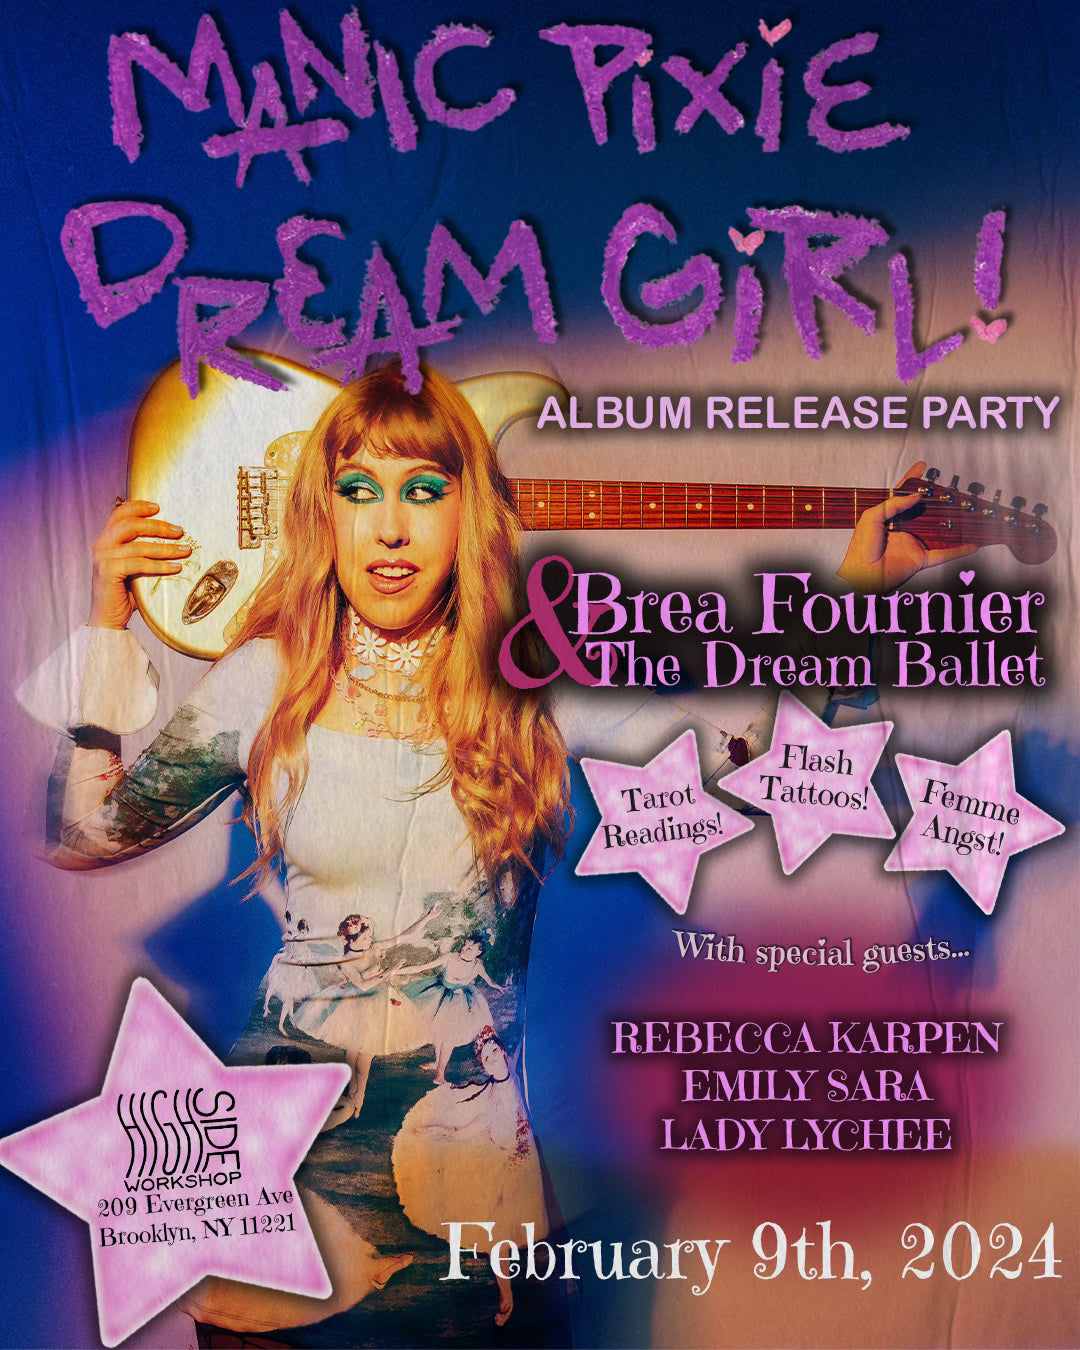 Manic Pixie Dream Girl release show tickets